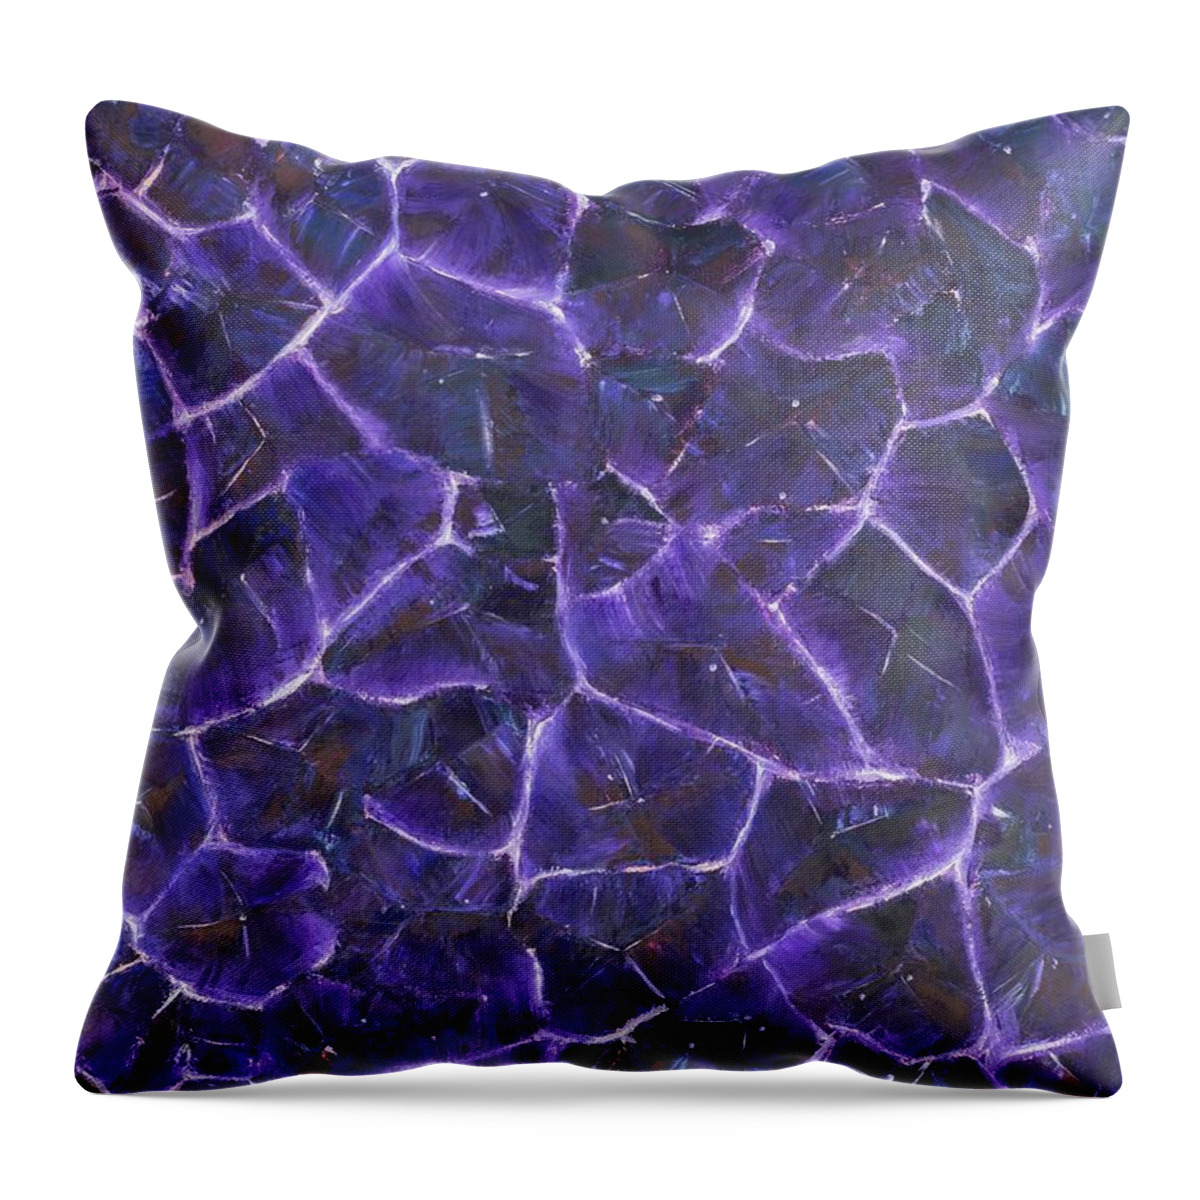 Amethyst Throw Pillow featuring the painting Amethyst by Neslihan Ergul Colley